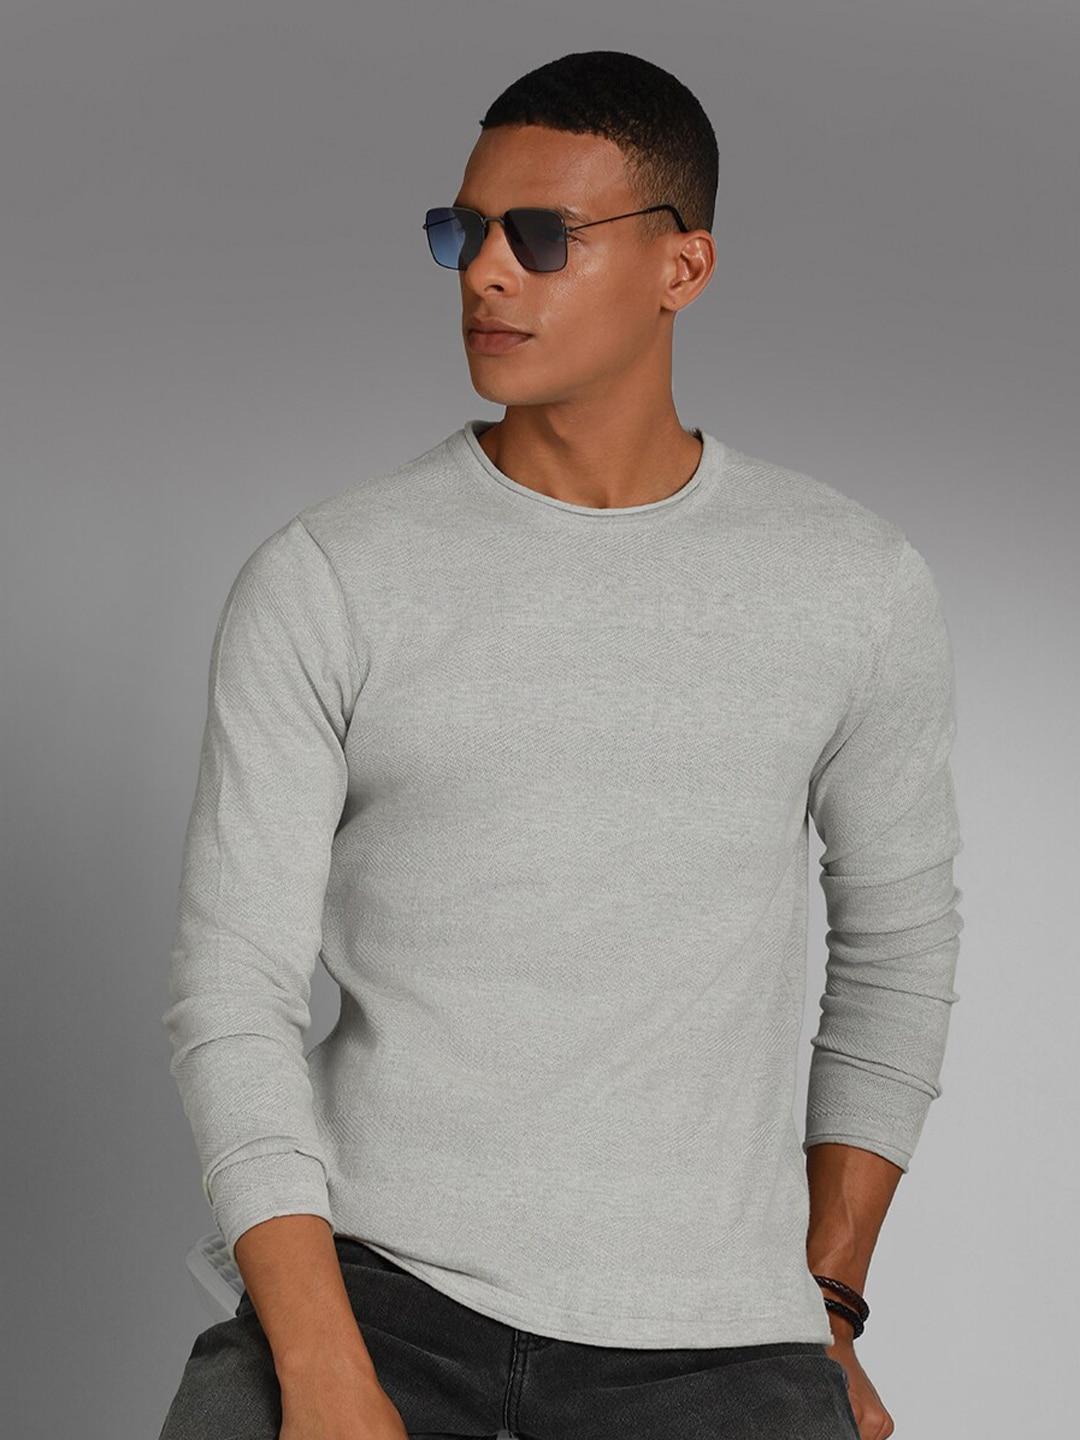 high-star-round-neck-long-sleeves-cotton-pullover-sweater